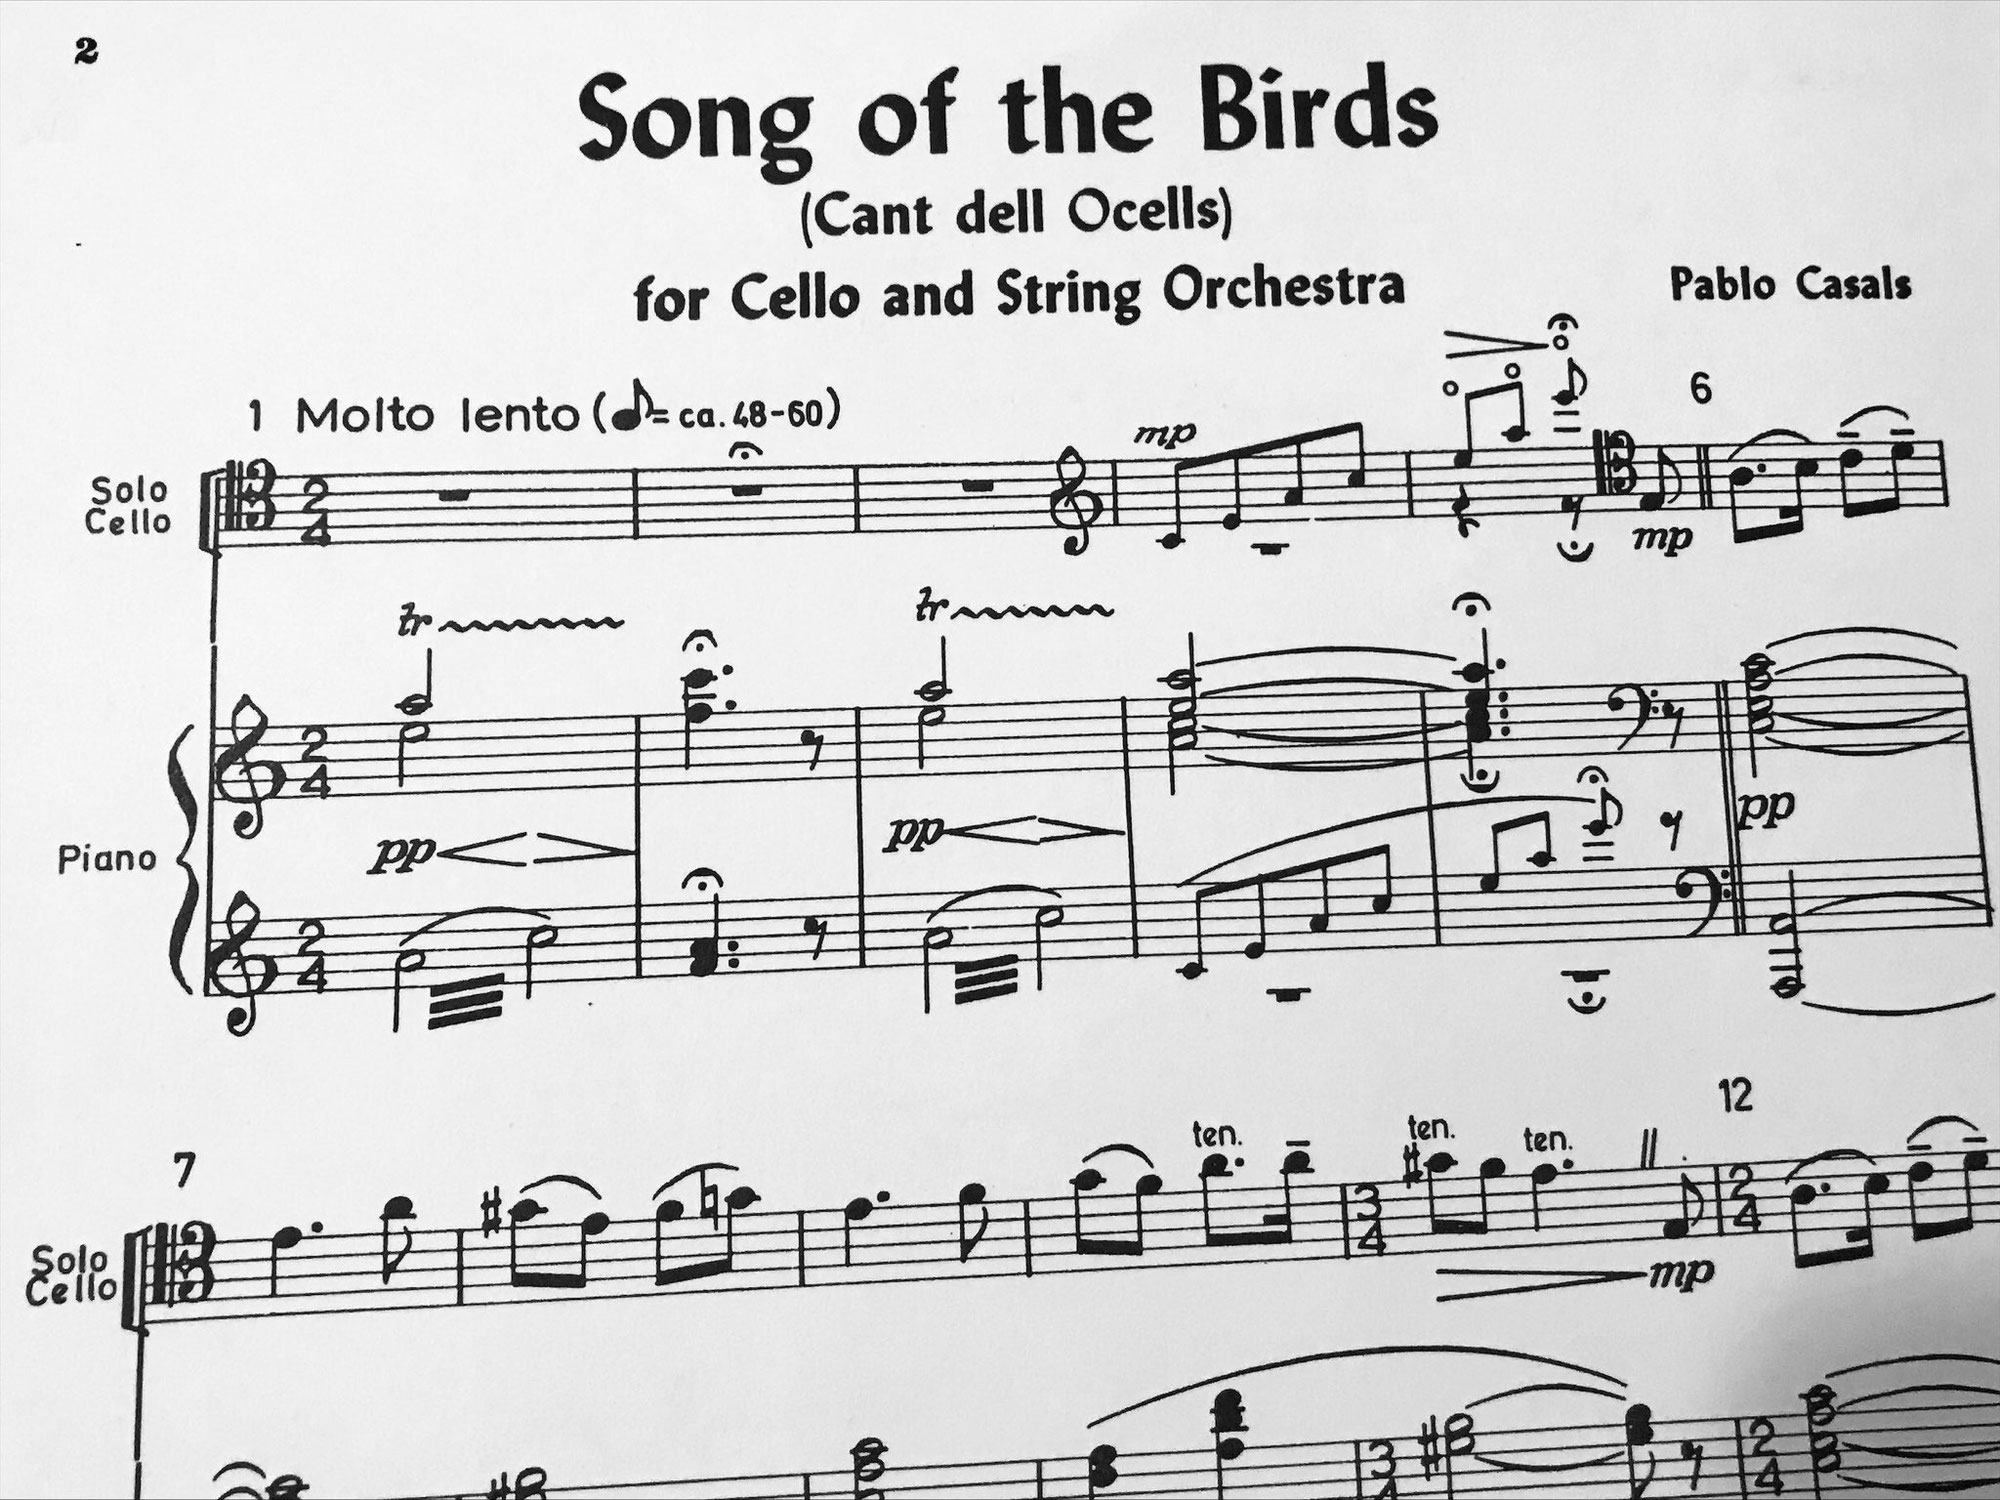 Song of the birds